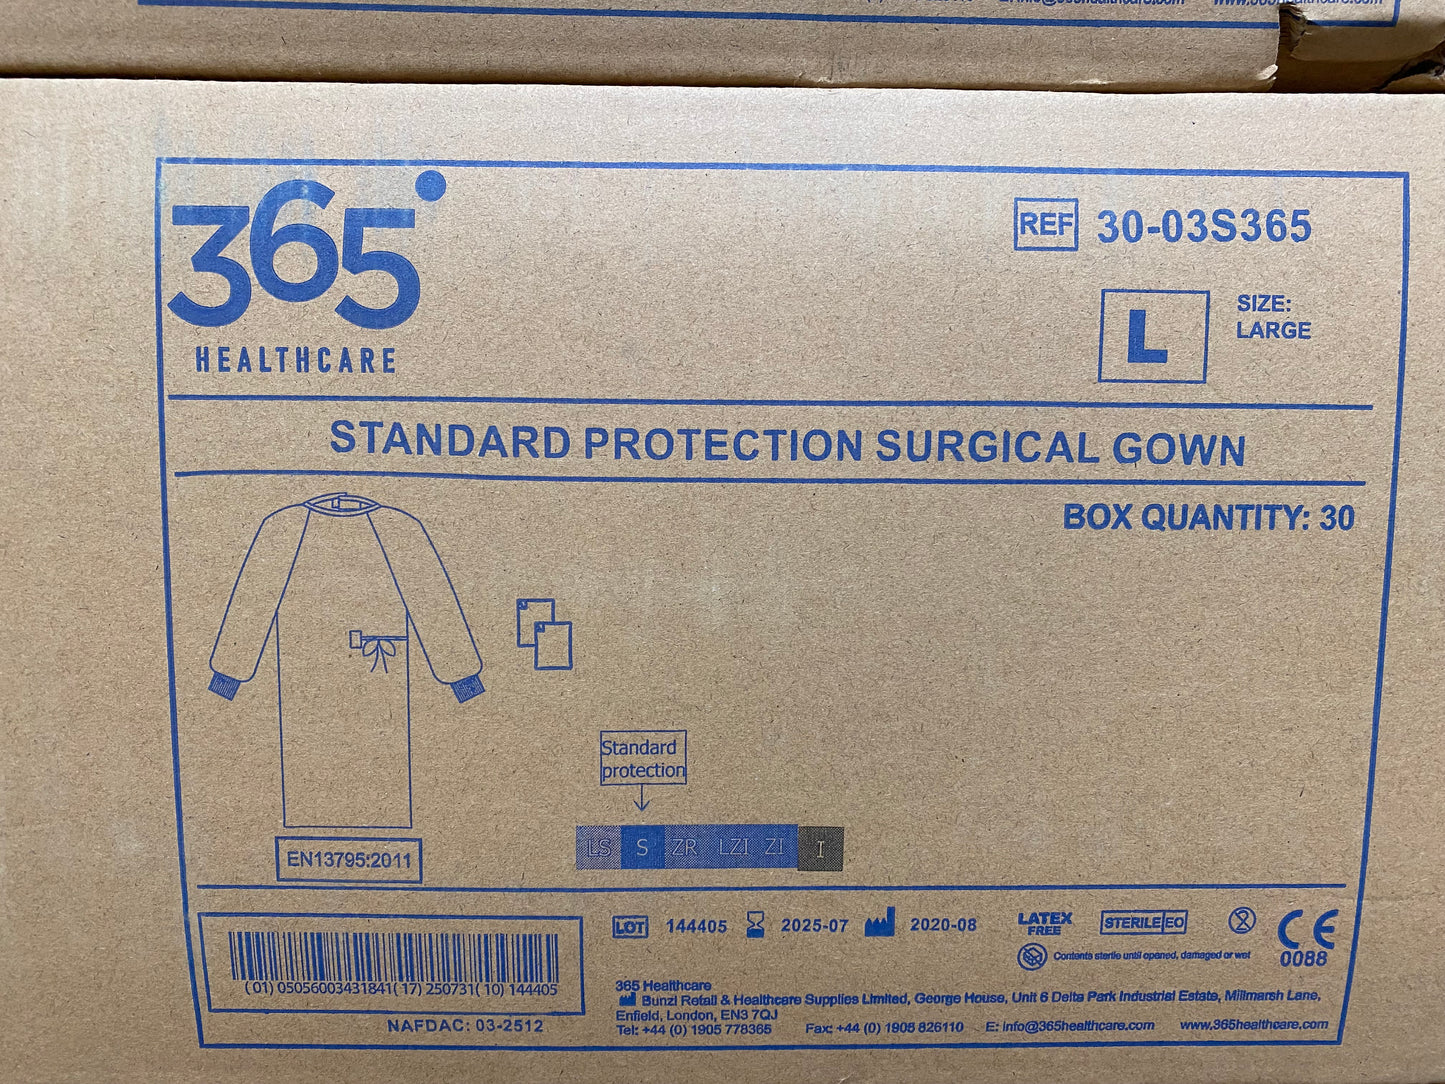 Protective Gown Surgical Gowns,  sterile,  large size, renowned brand 365, box of 30, used throughout nhs and private clinics